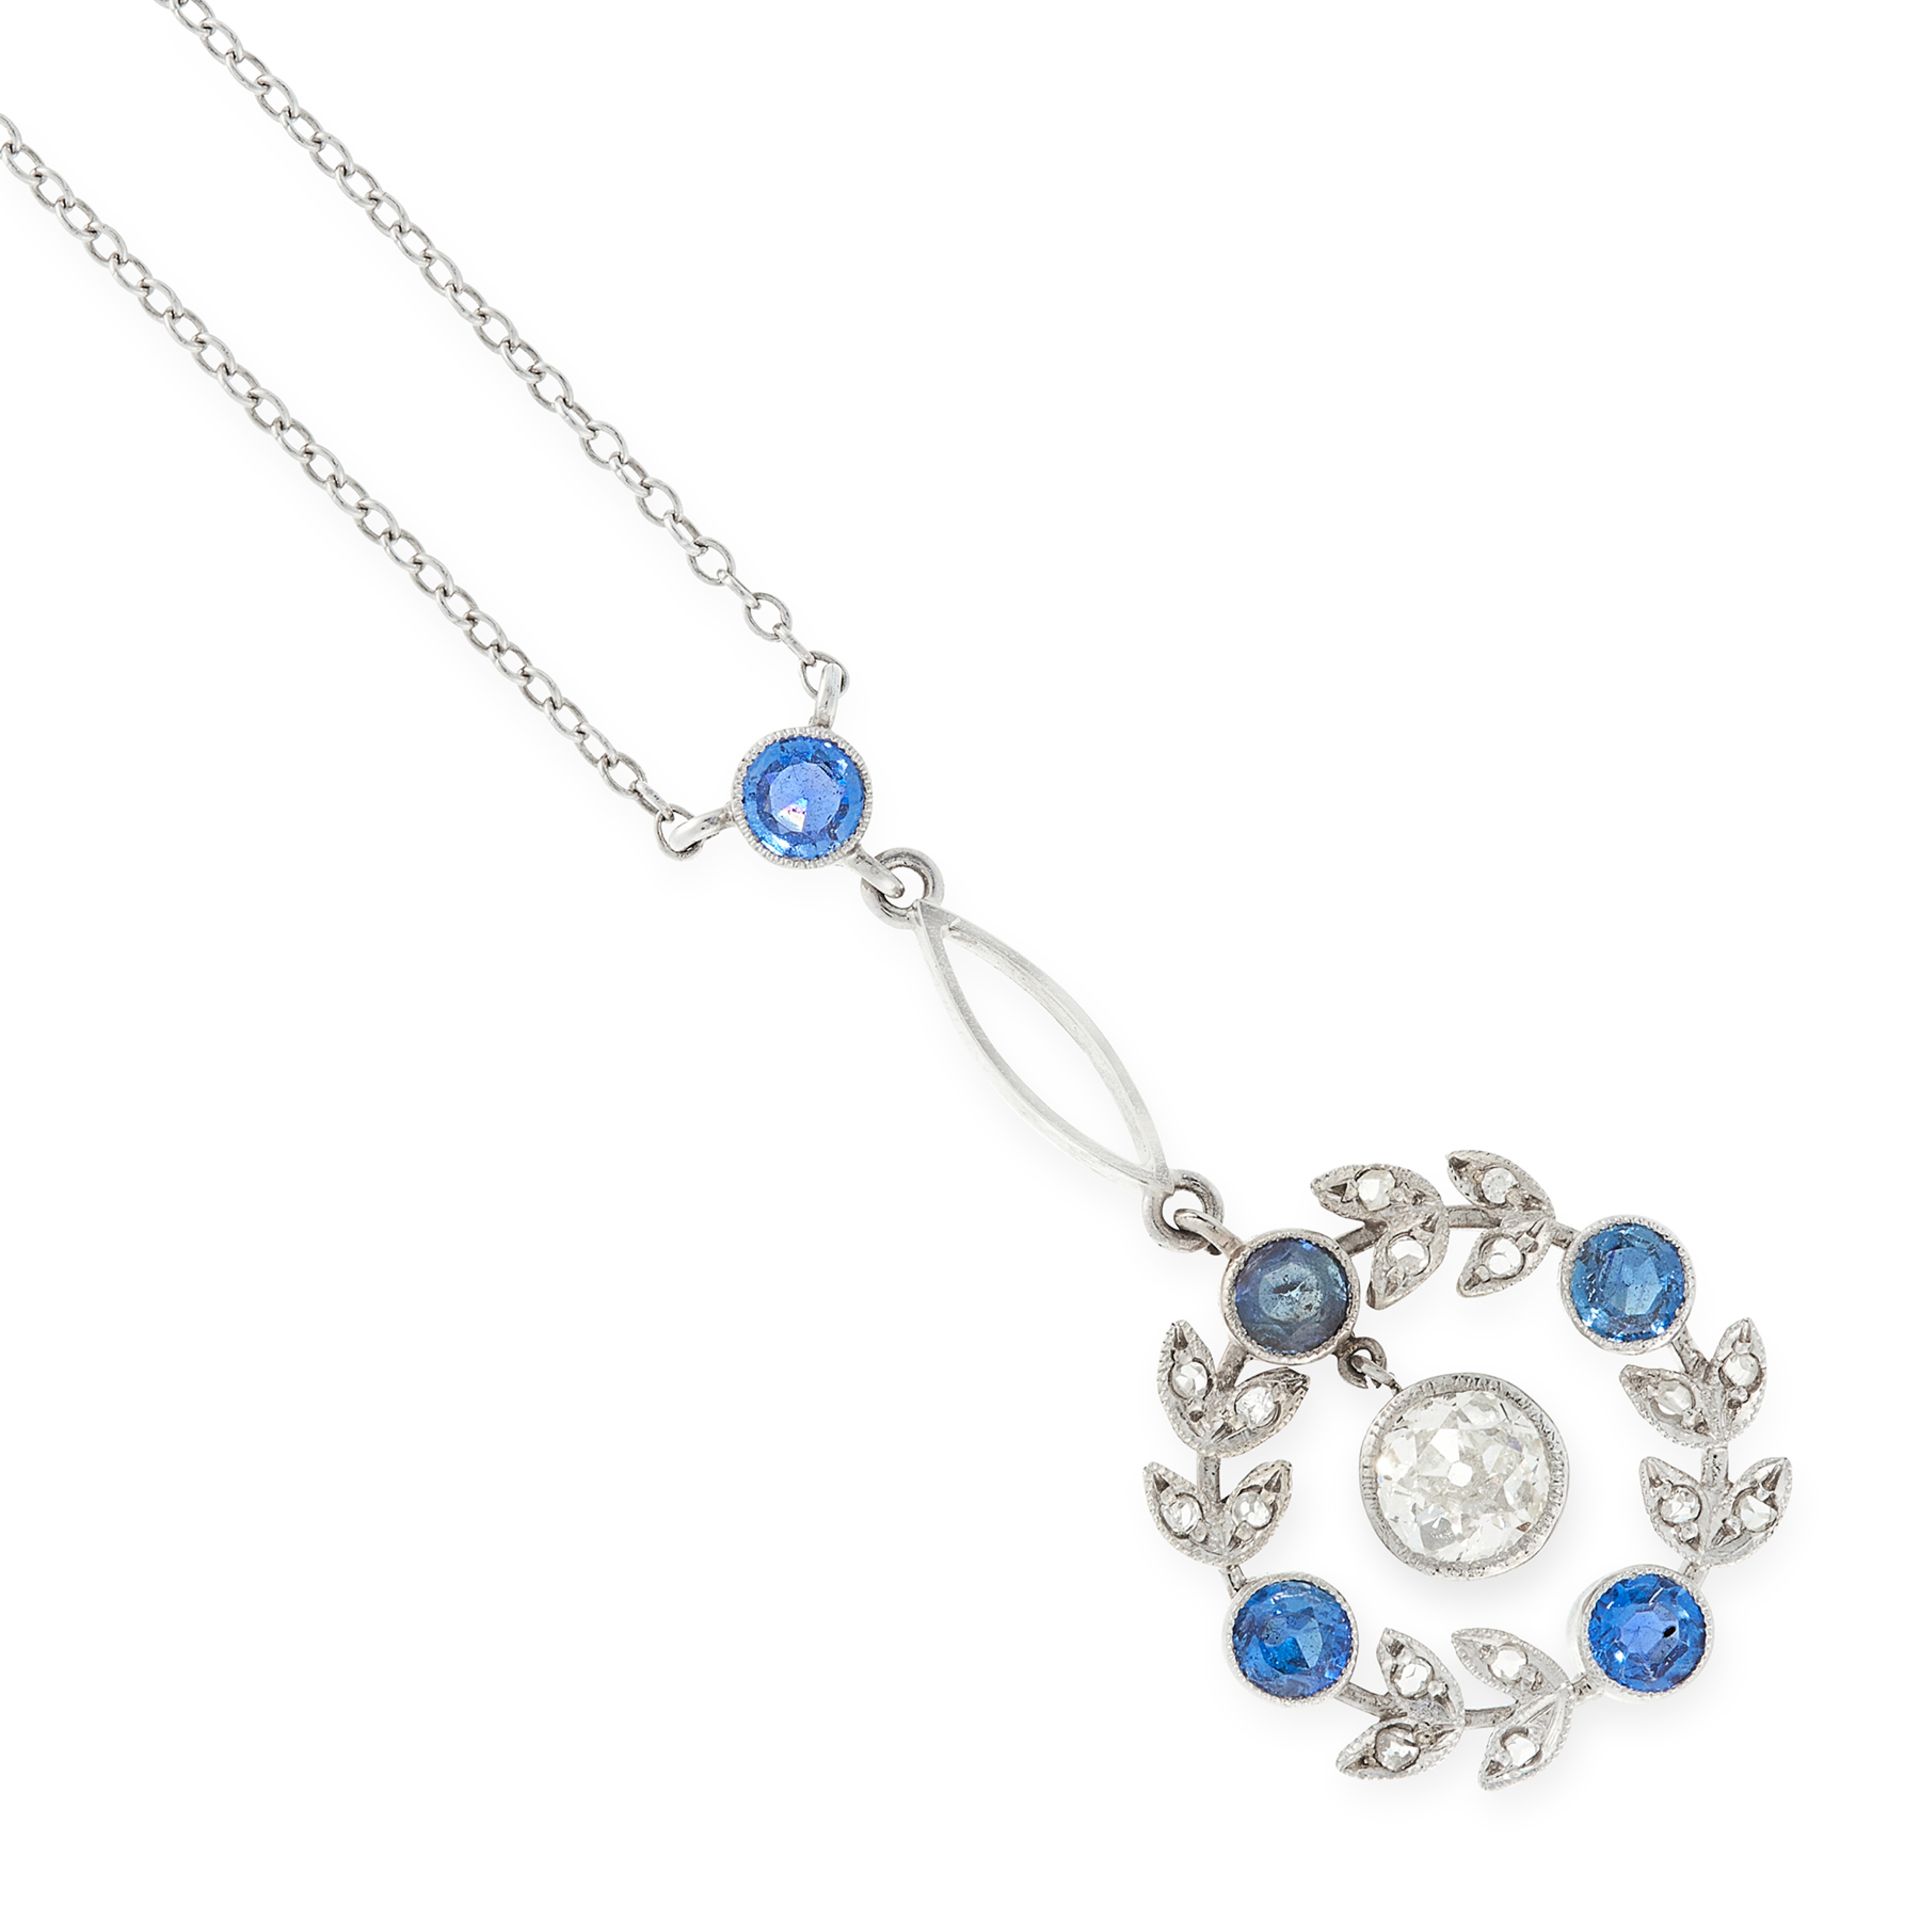 A DIAMOND AND SAPPHIRE PENDANT NECKLACE set with an old cut diamond of 0.55 carats, suspended within